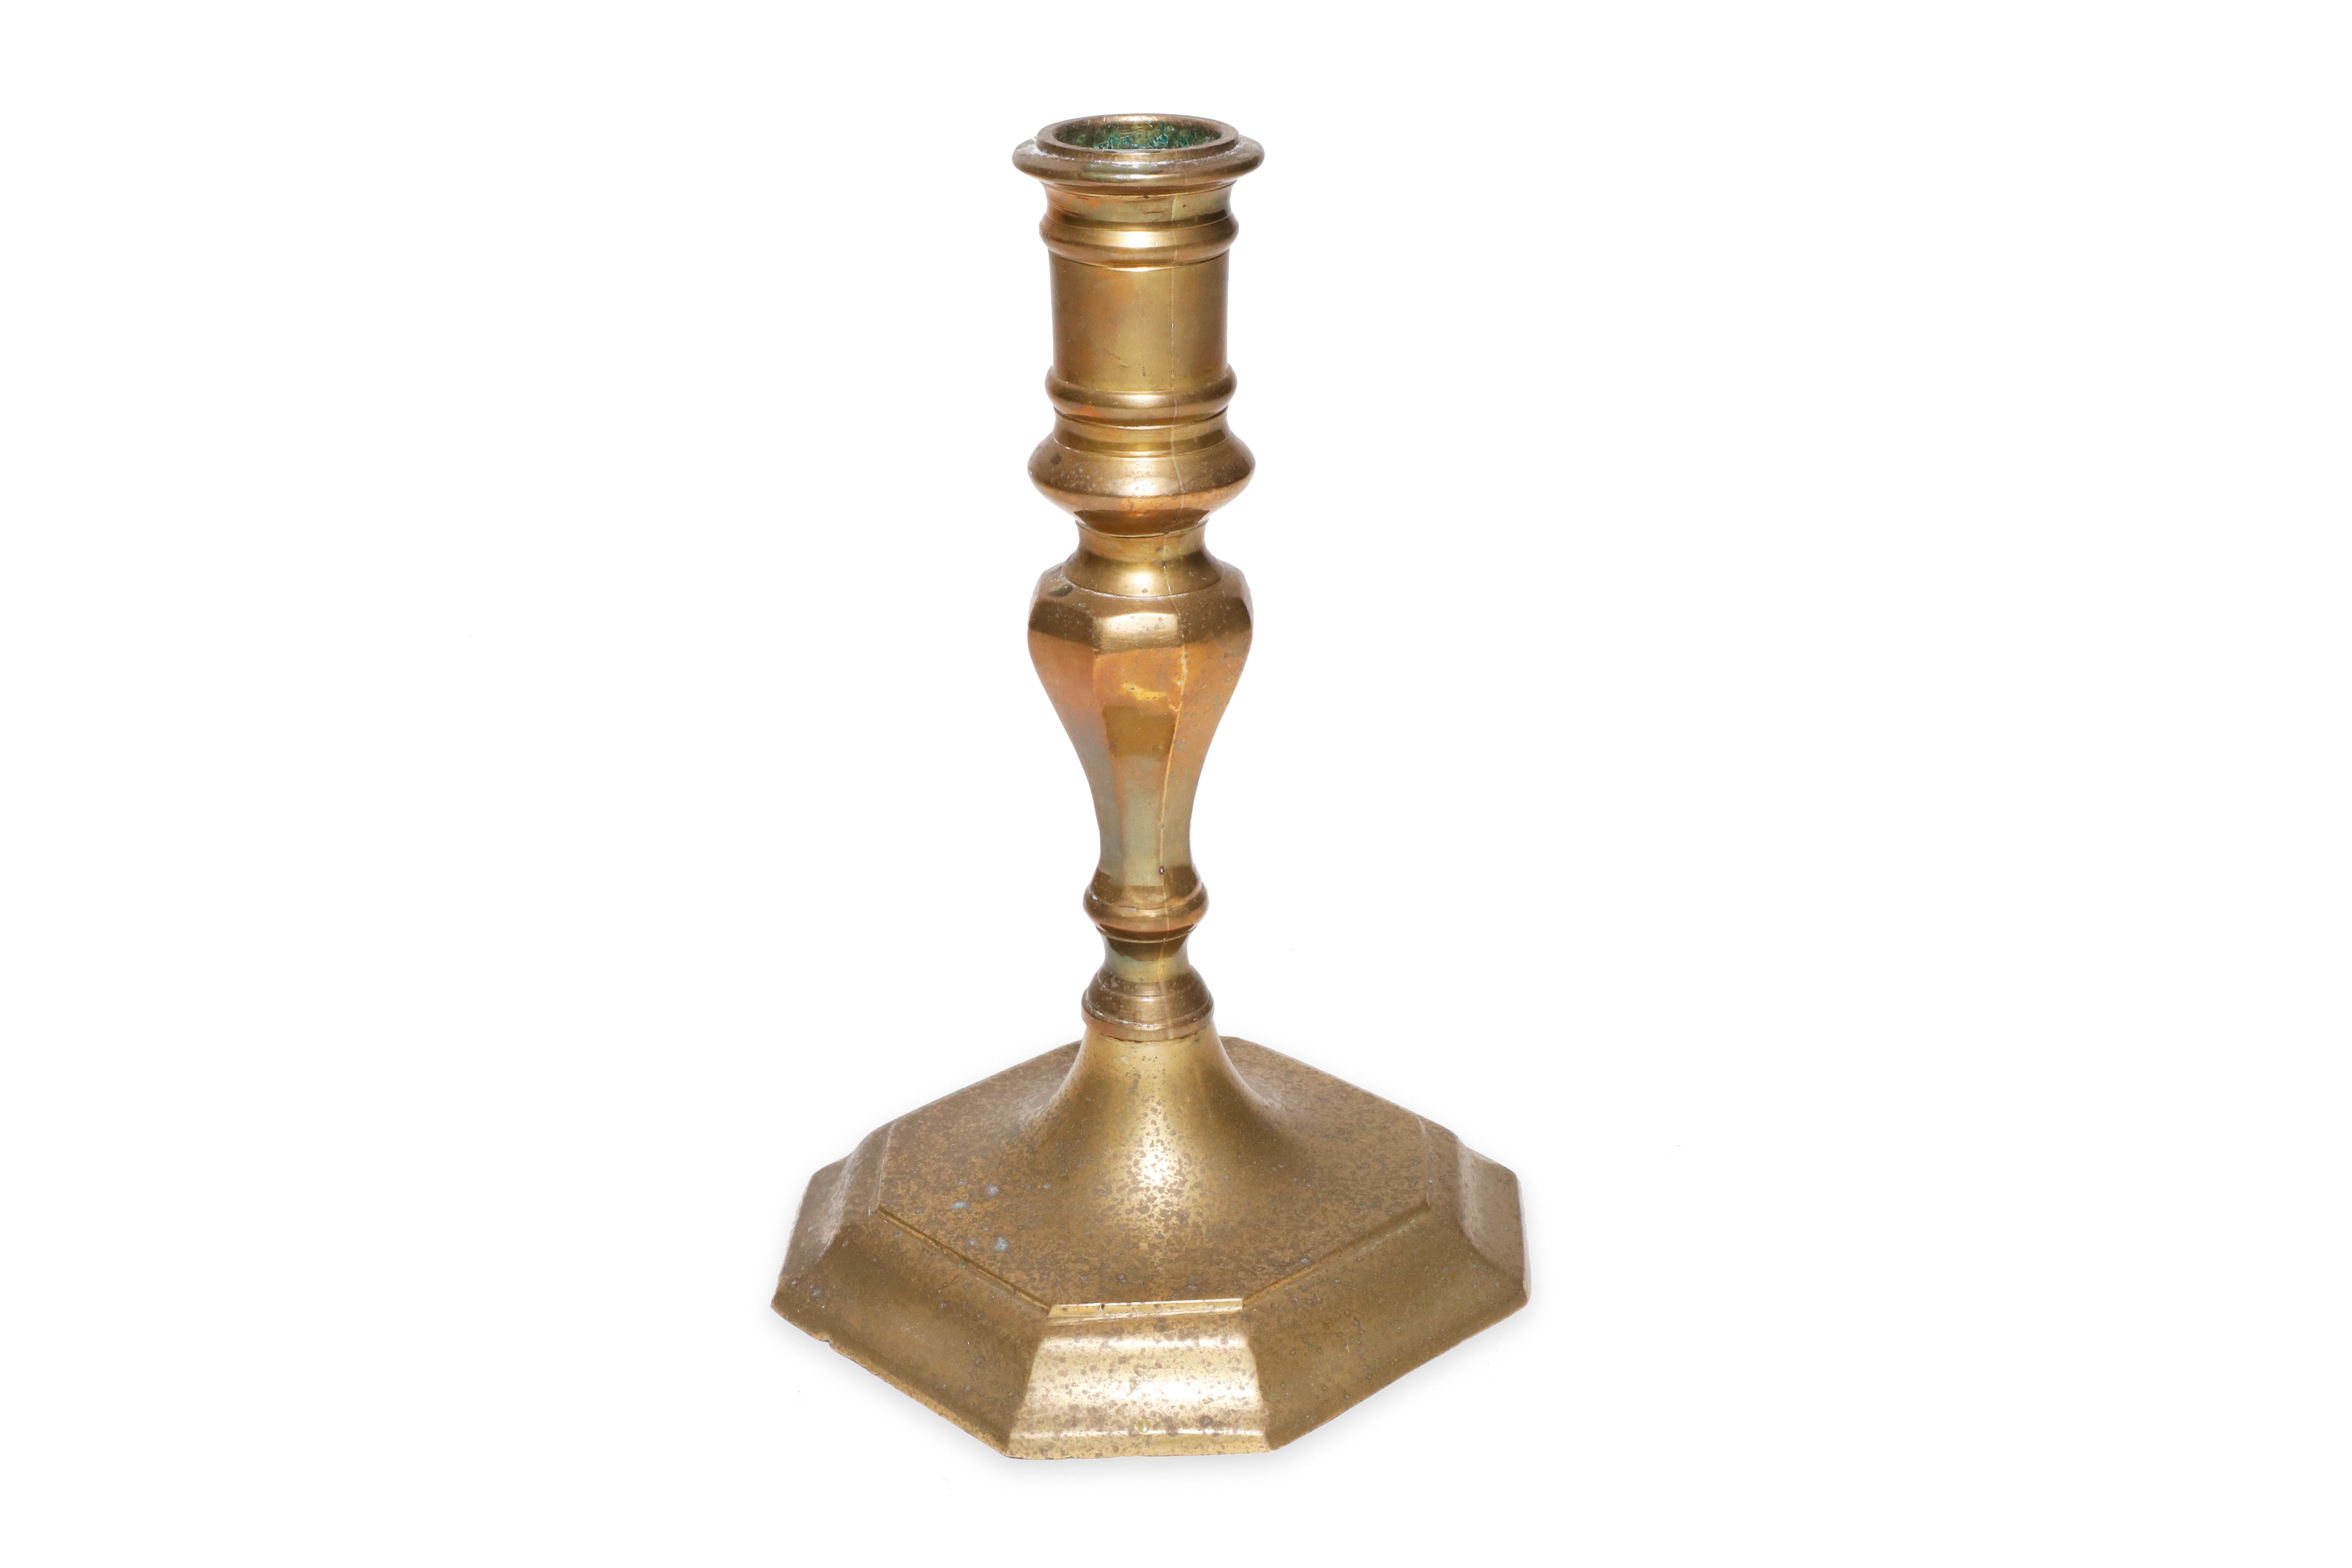 Pair of Victorian candle holders from the 19th century. Authentic English solid brass candlesticks holder with age patina intact (unpolished.)

Property from esteemed interior designer Juan Montoya. Juan Montoya is one of the most acclaimed and